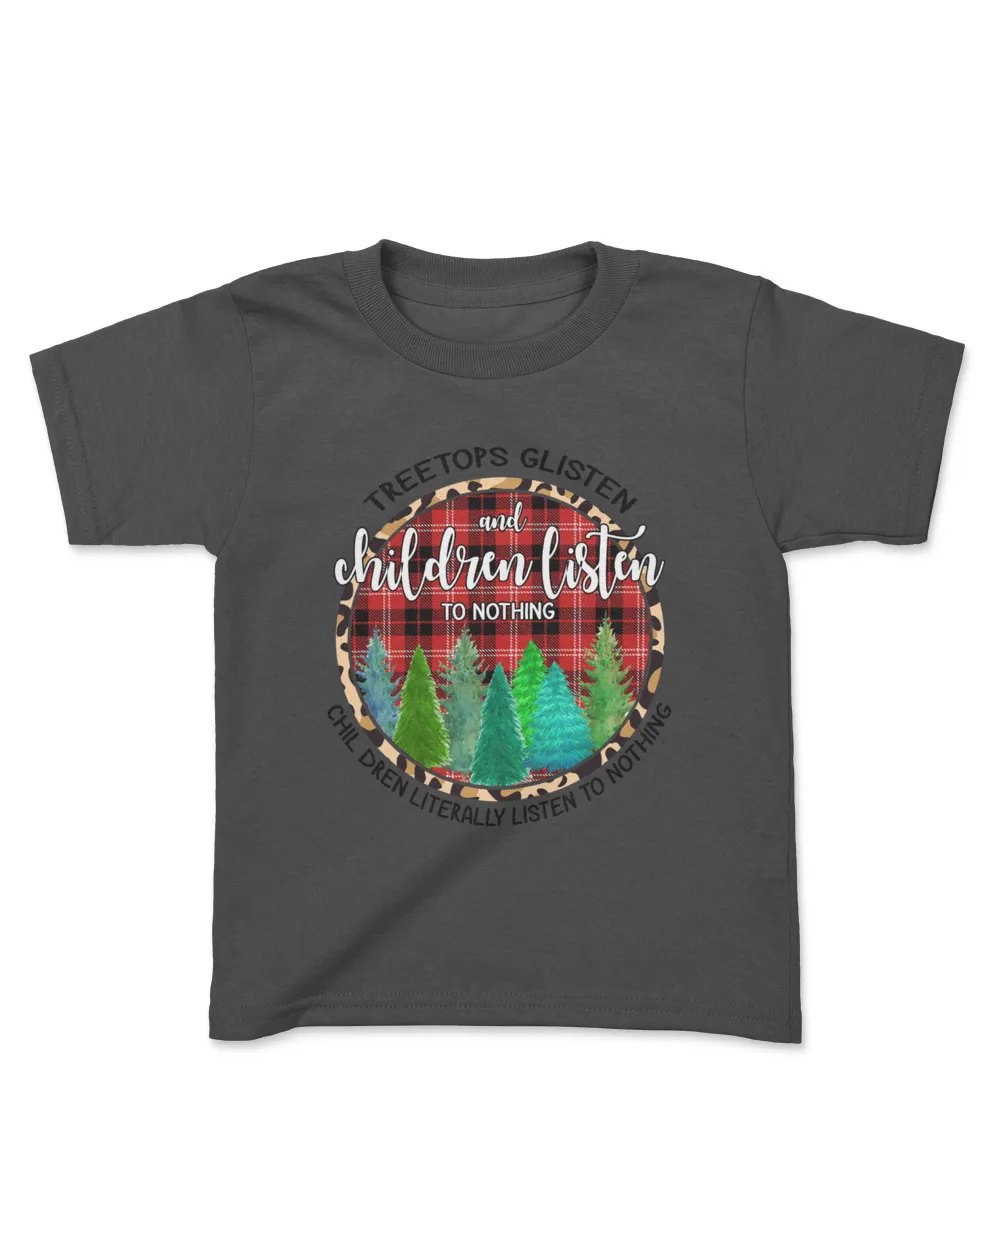 Treetops Glisten And Children Listen To Nothing Buffalo Plaid Christmas